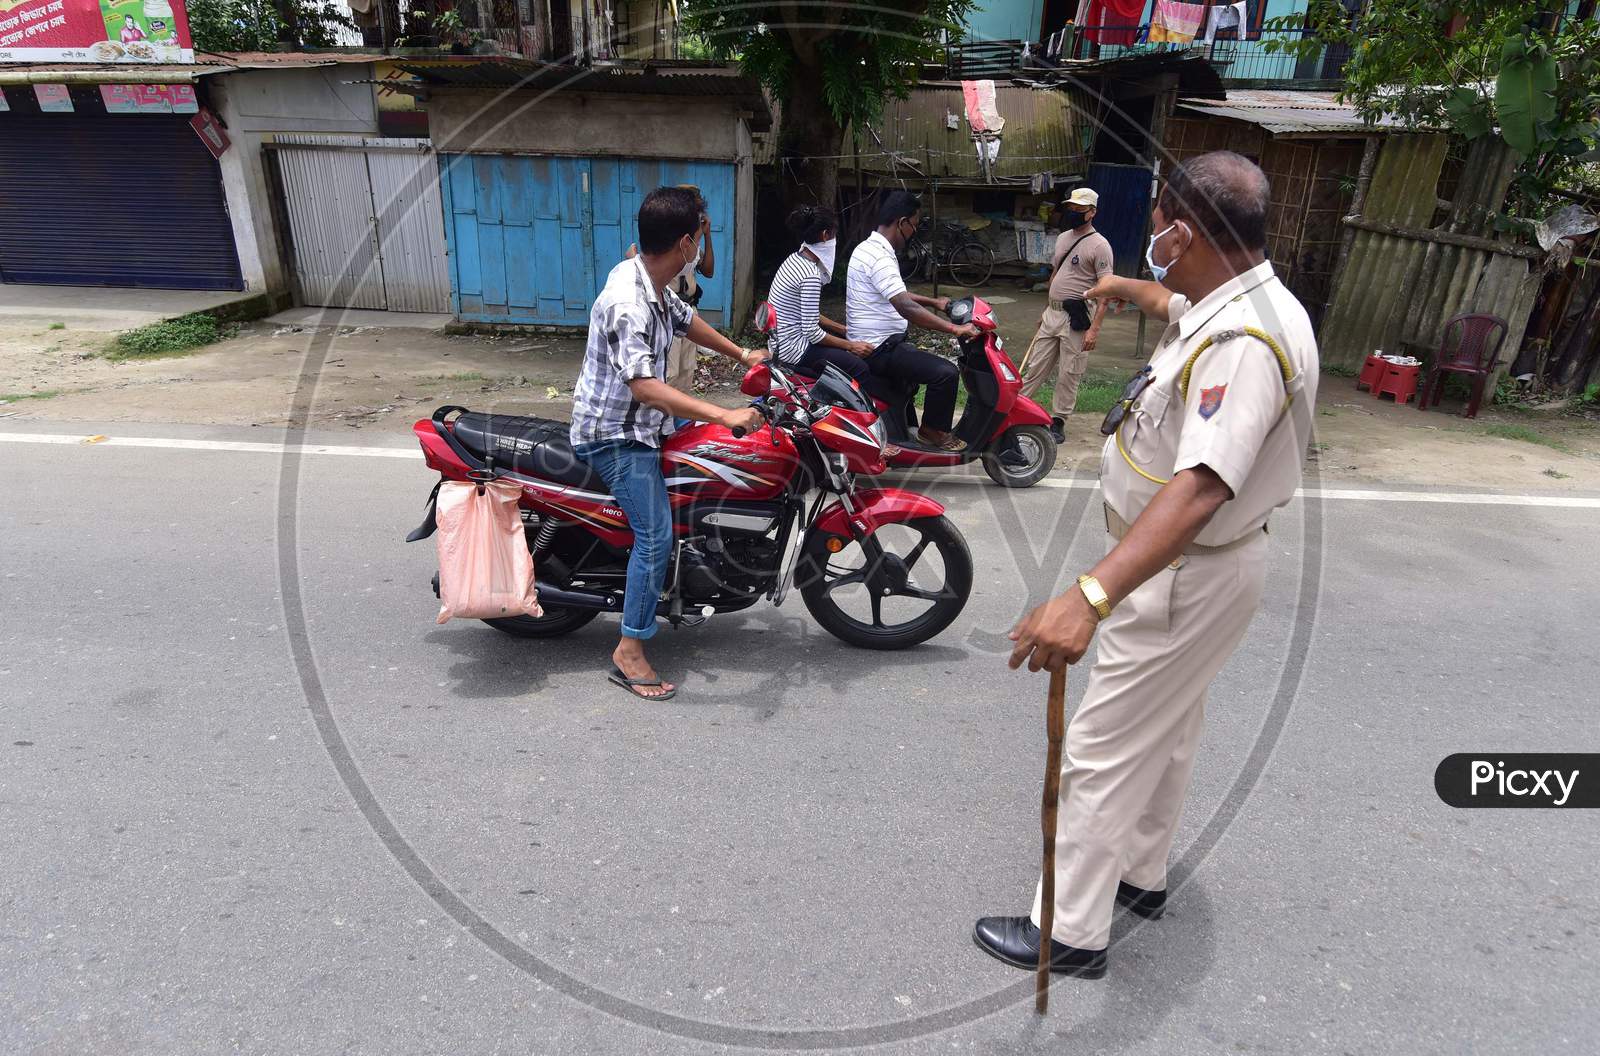 Police question bike riders during the lockdown imposed to curb the spread of Coronavirus in Nagaon, Assam on July 05, 2020